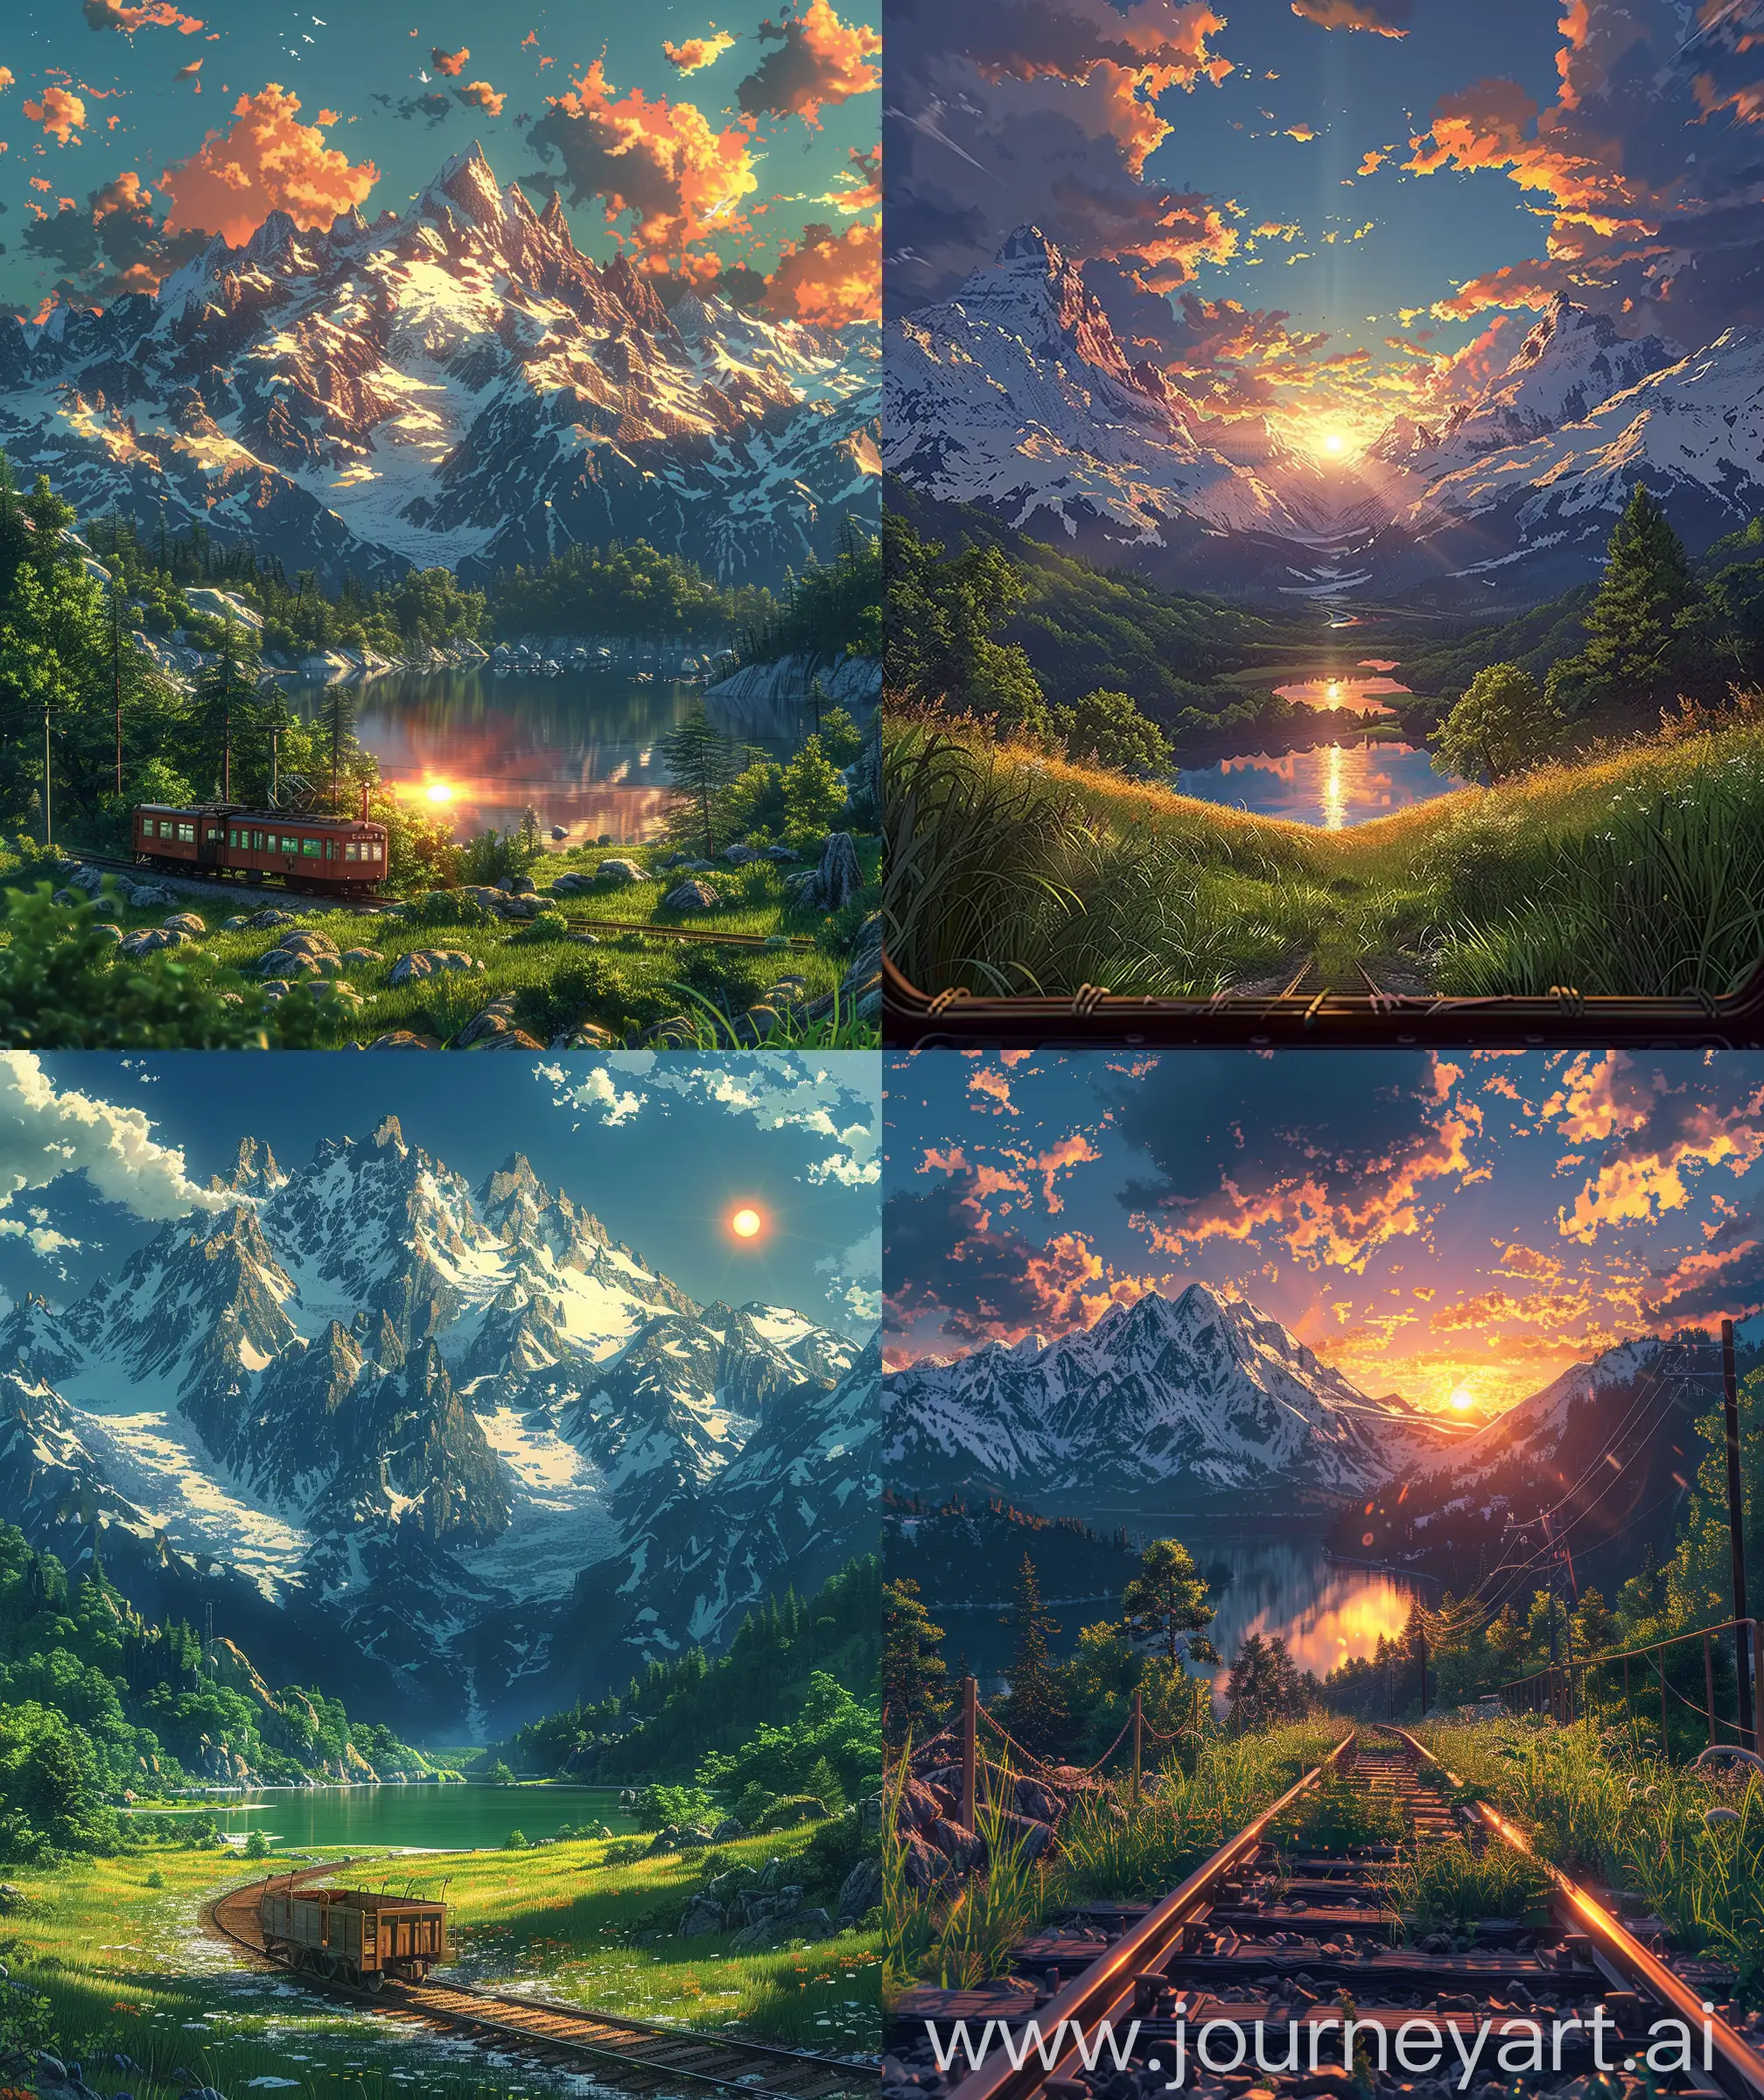 Anime-Scenery-Illustration-Serene-Dawn-View-from-Train-with-Snowy-Mountains-and-Lakes